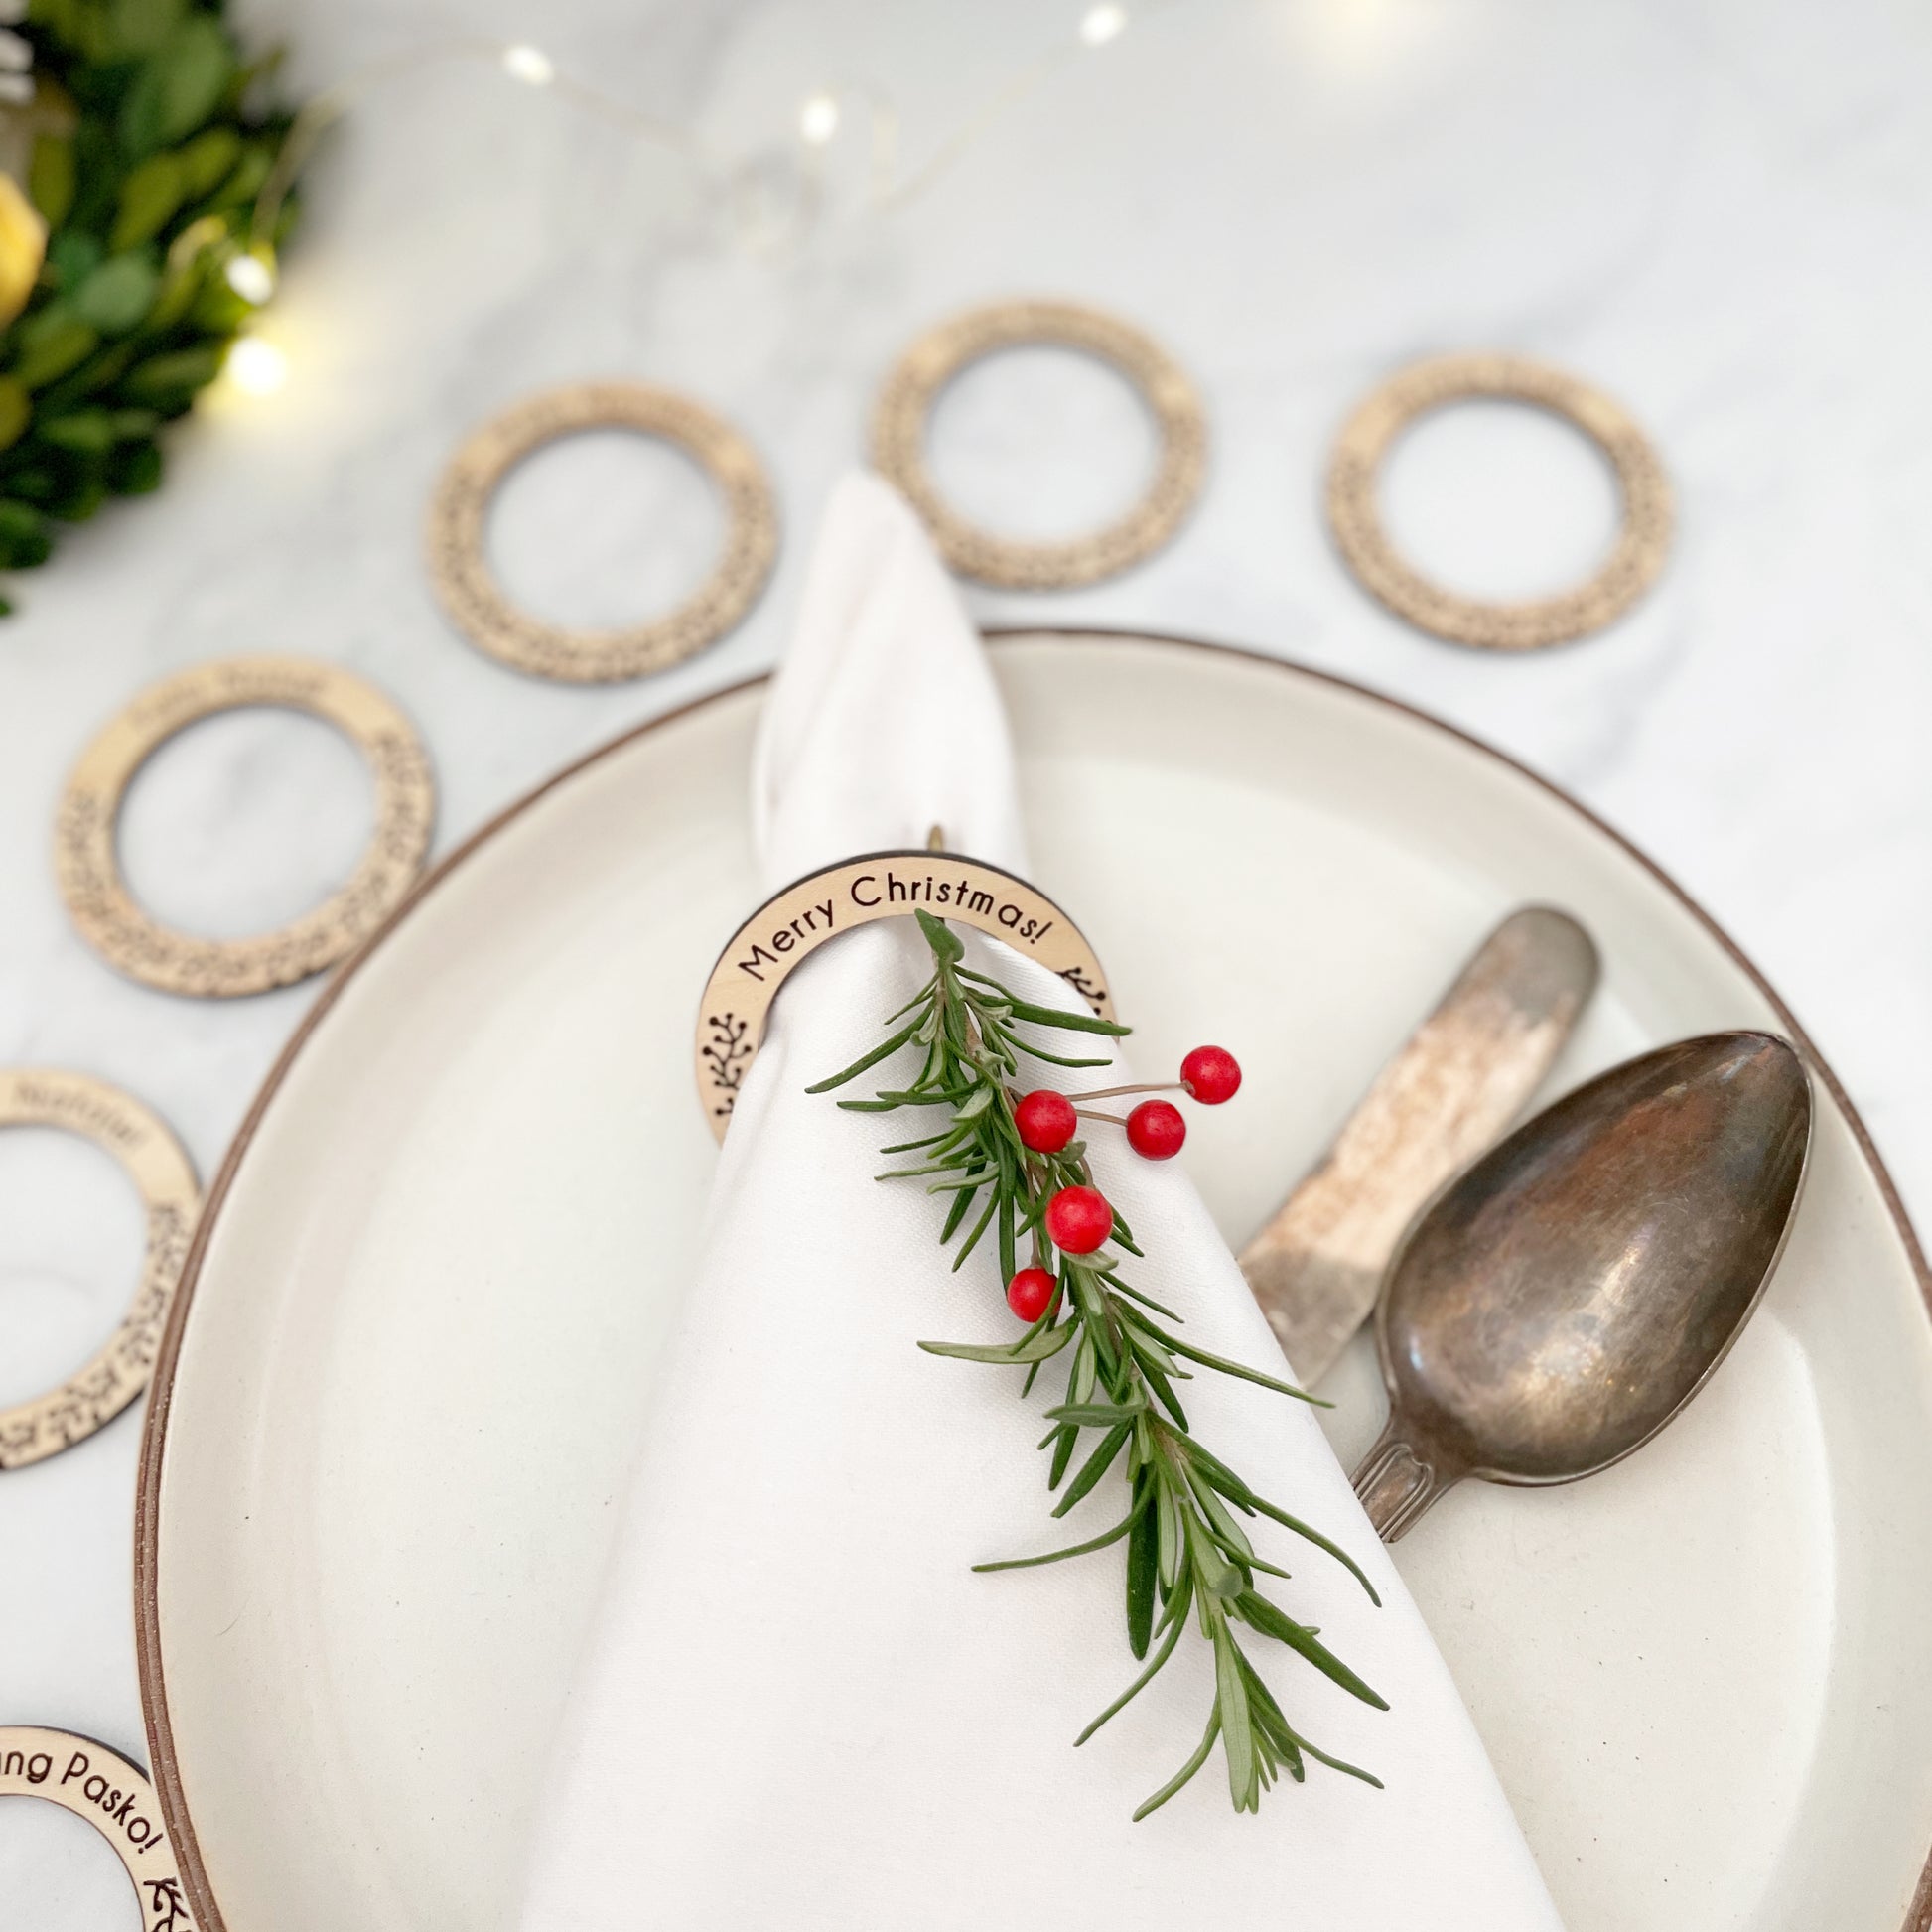 Lovely Christmas napkin rings with a fun twist